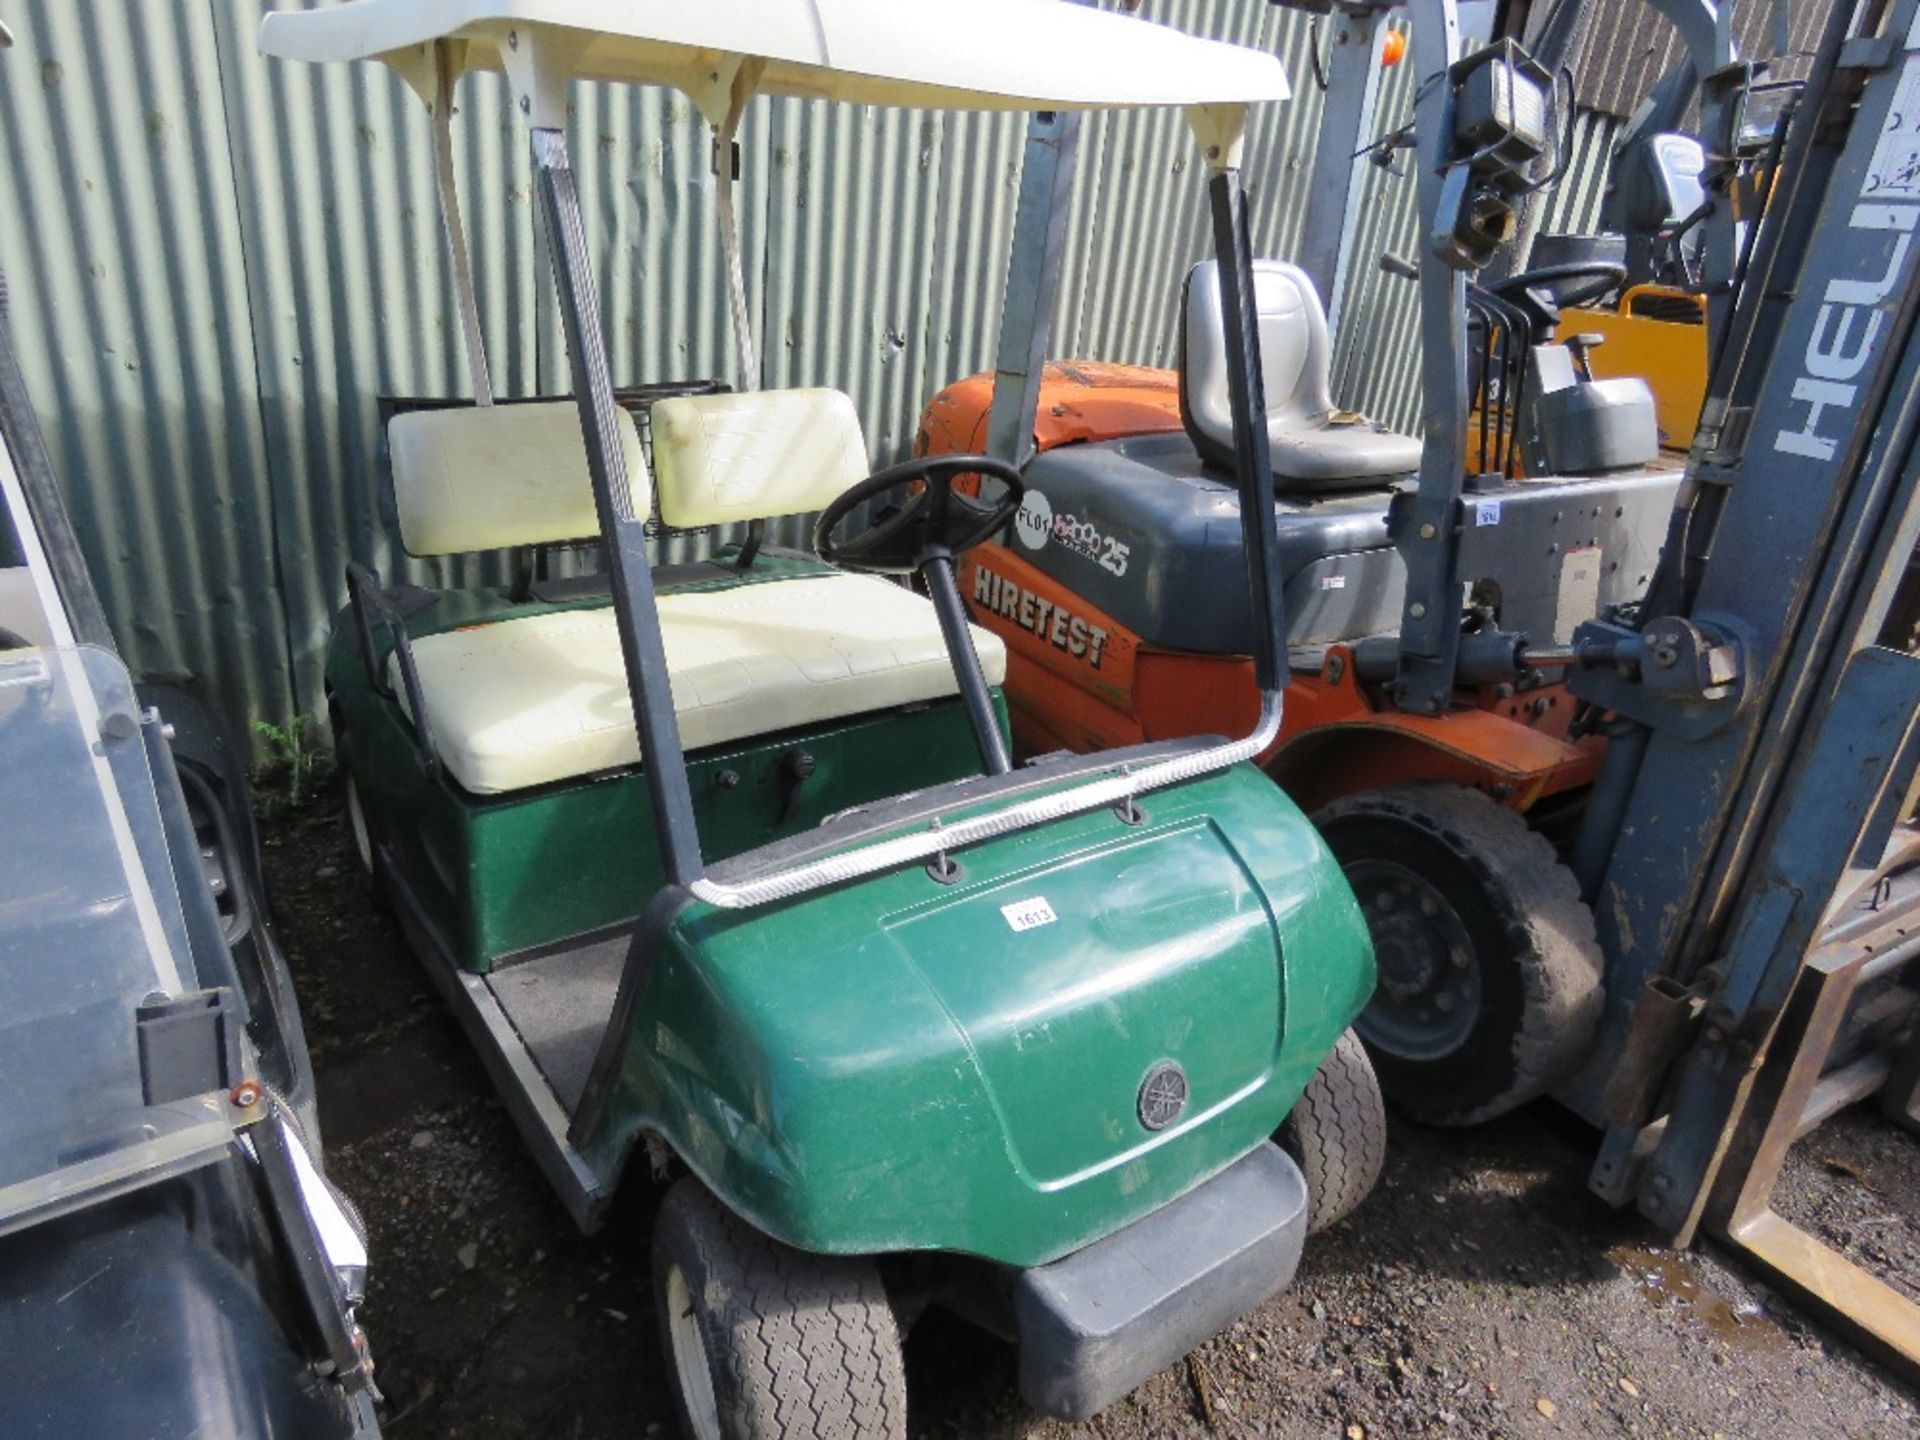 YAMAHA PETROL ENGINED GOLF BUGGY. WHEN TESTED WAS SEEN TO RUN AND DRIVE...SEE VIDEO.